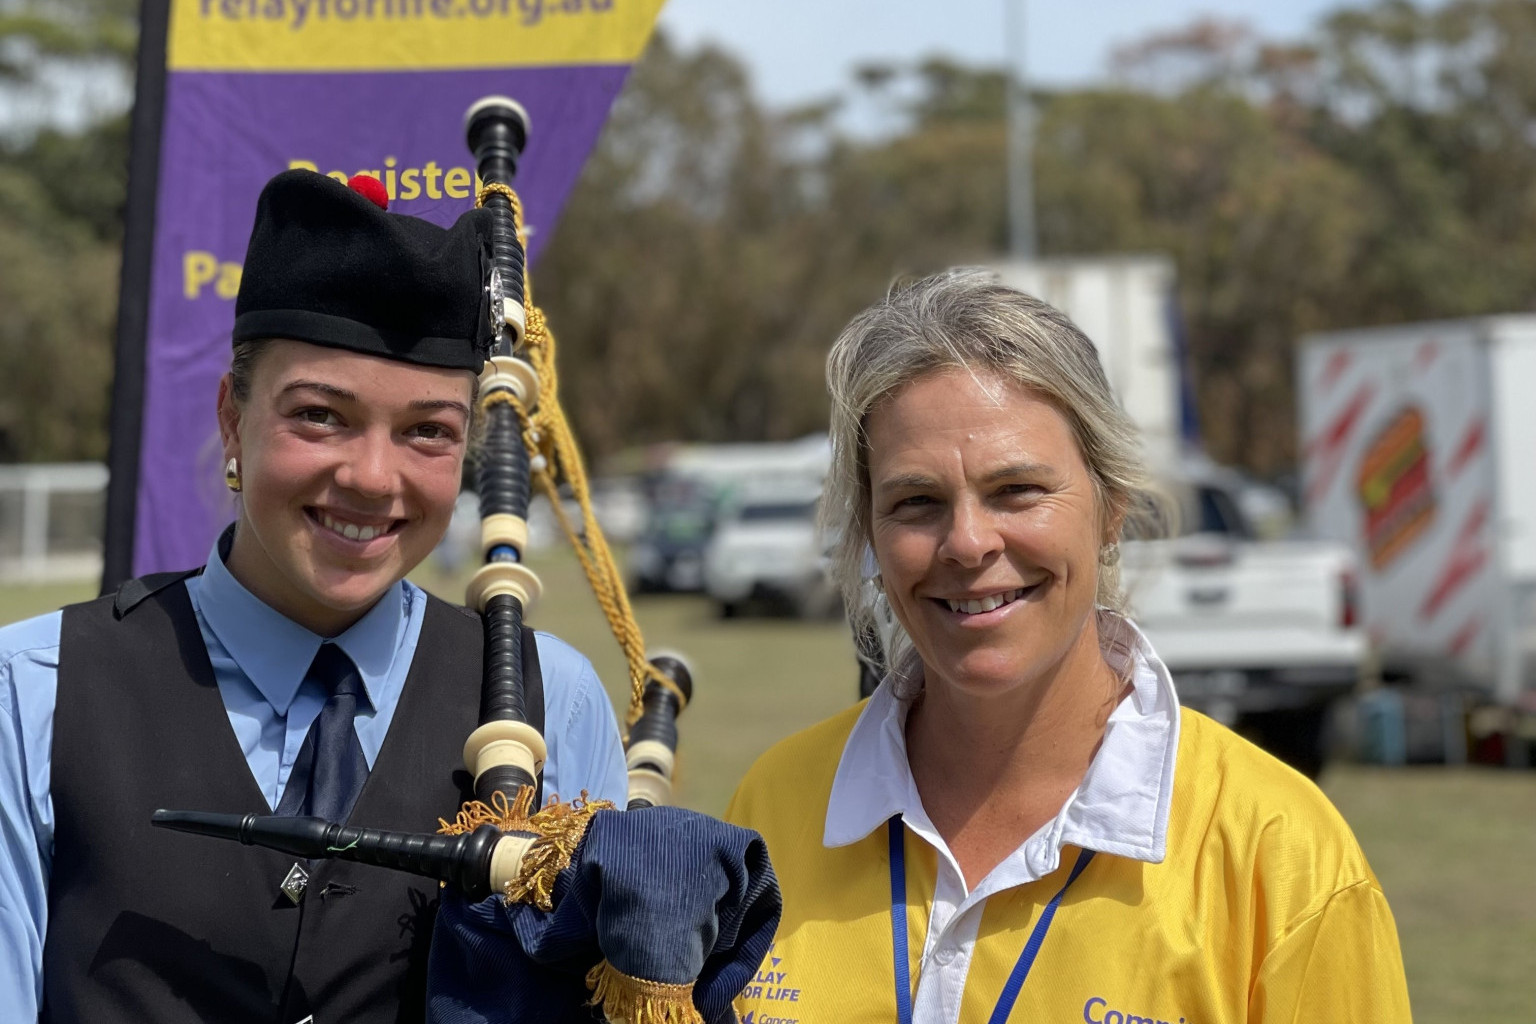 Generations gathered in Warrnambool last weekend, united in the fight against cancer for this year’s Relay for Life. Nineteen-year-old former Warrnambool College student Hannah VanZyl was honoured to lead the opening lap playing the bagpies, along with organiser Jodie Carey.